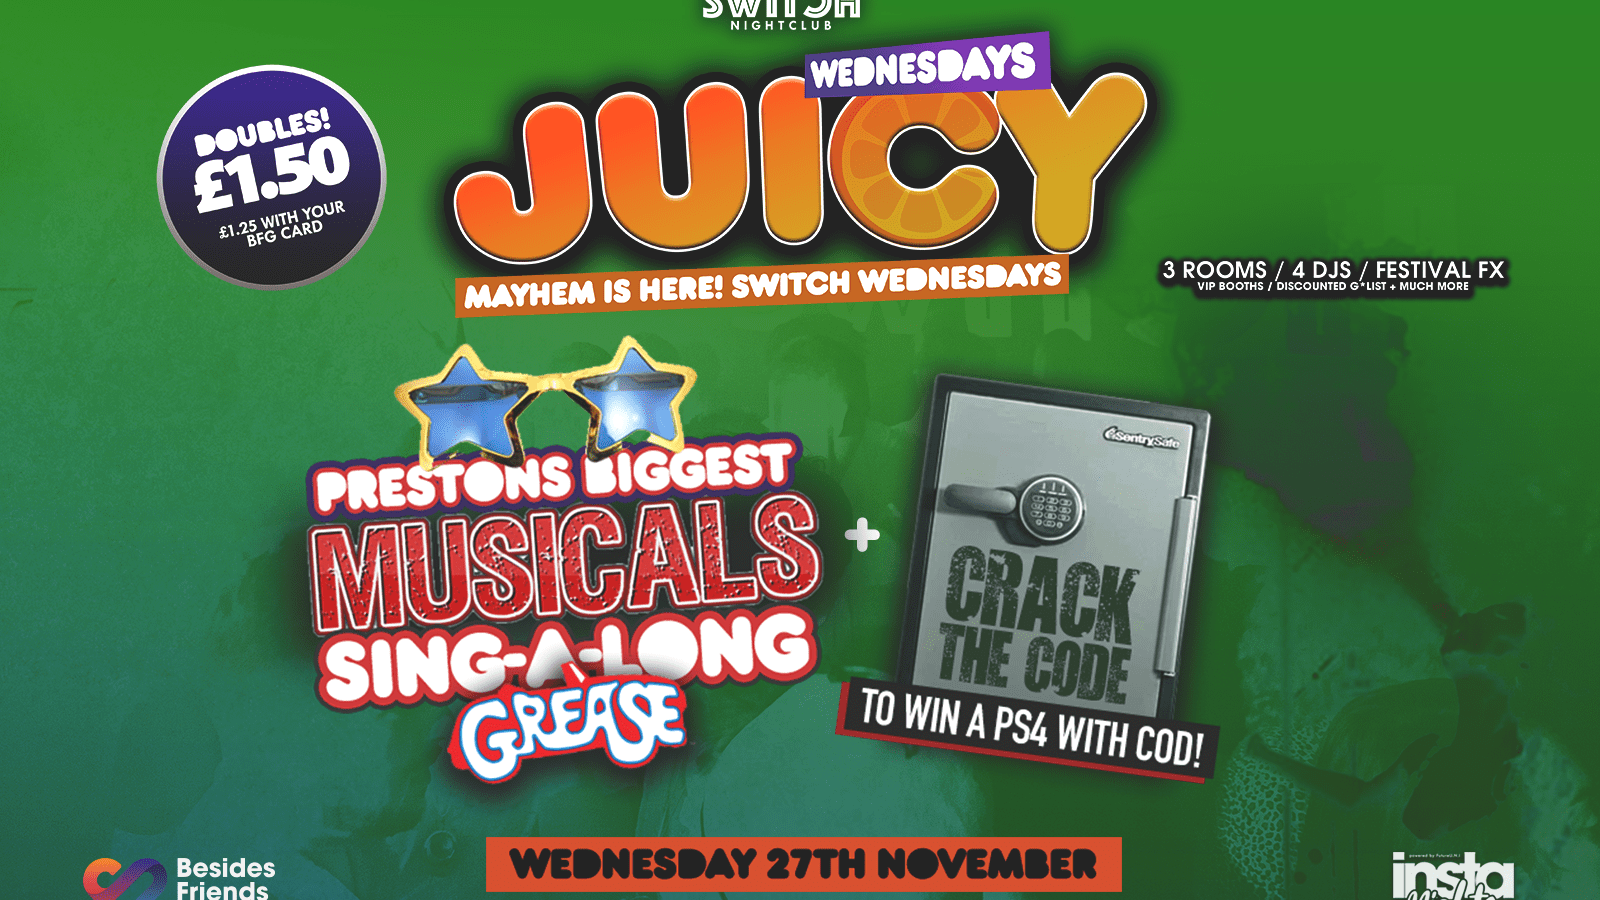 Juicy Wednesdays Presents Musical Sing-A-Long Grease + Crack The Code